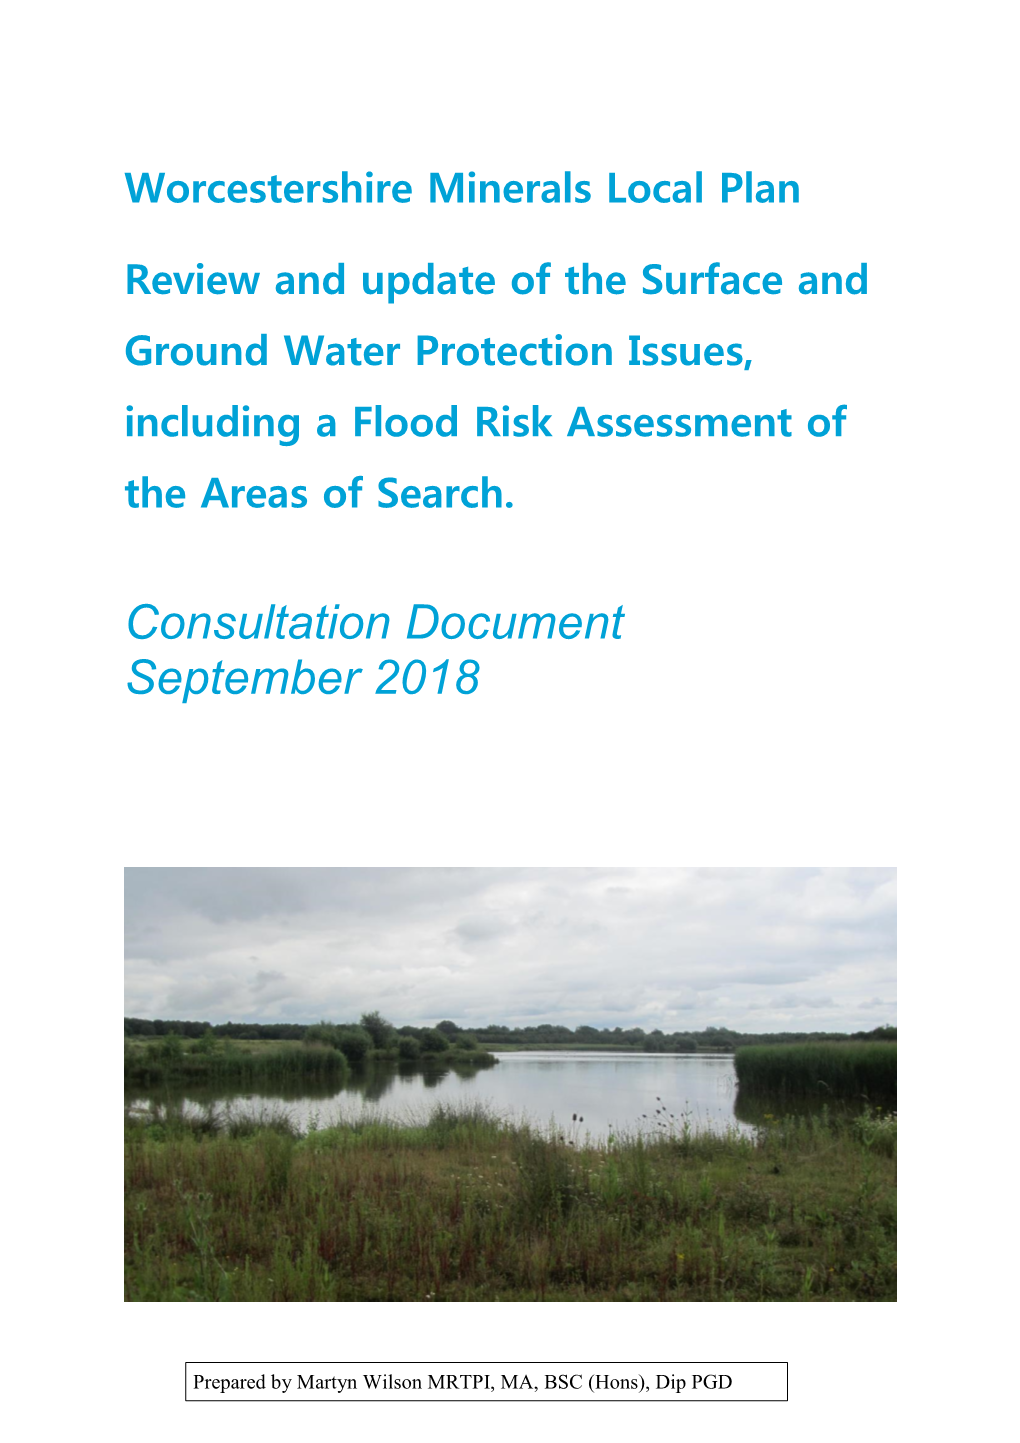 Review and Update of the Surface and Ground Water Protection Issues, Including a Flood Risk Assessment of the Areas of Search